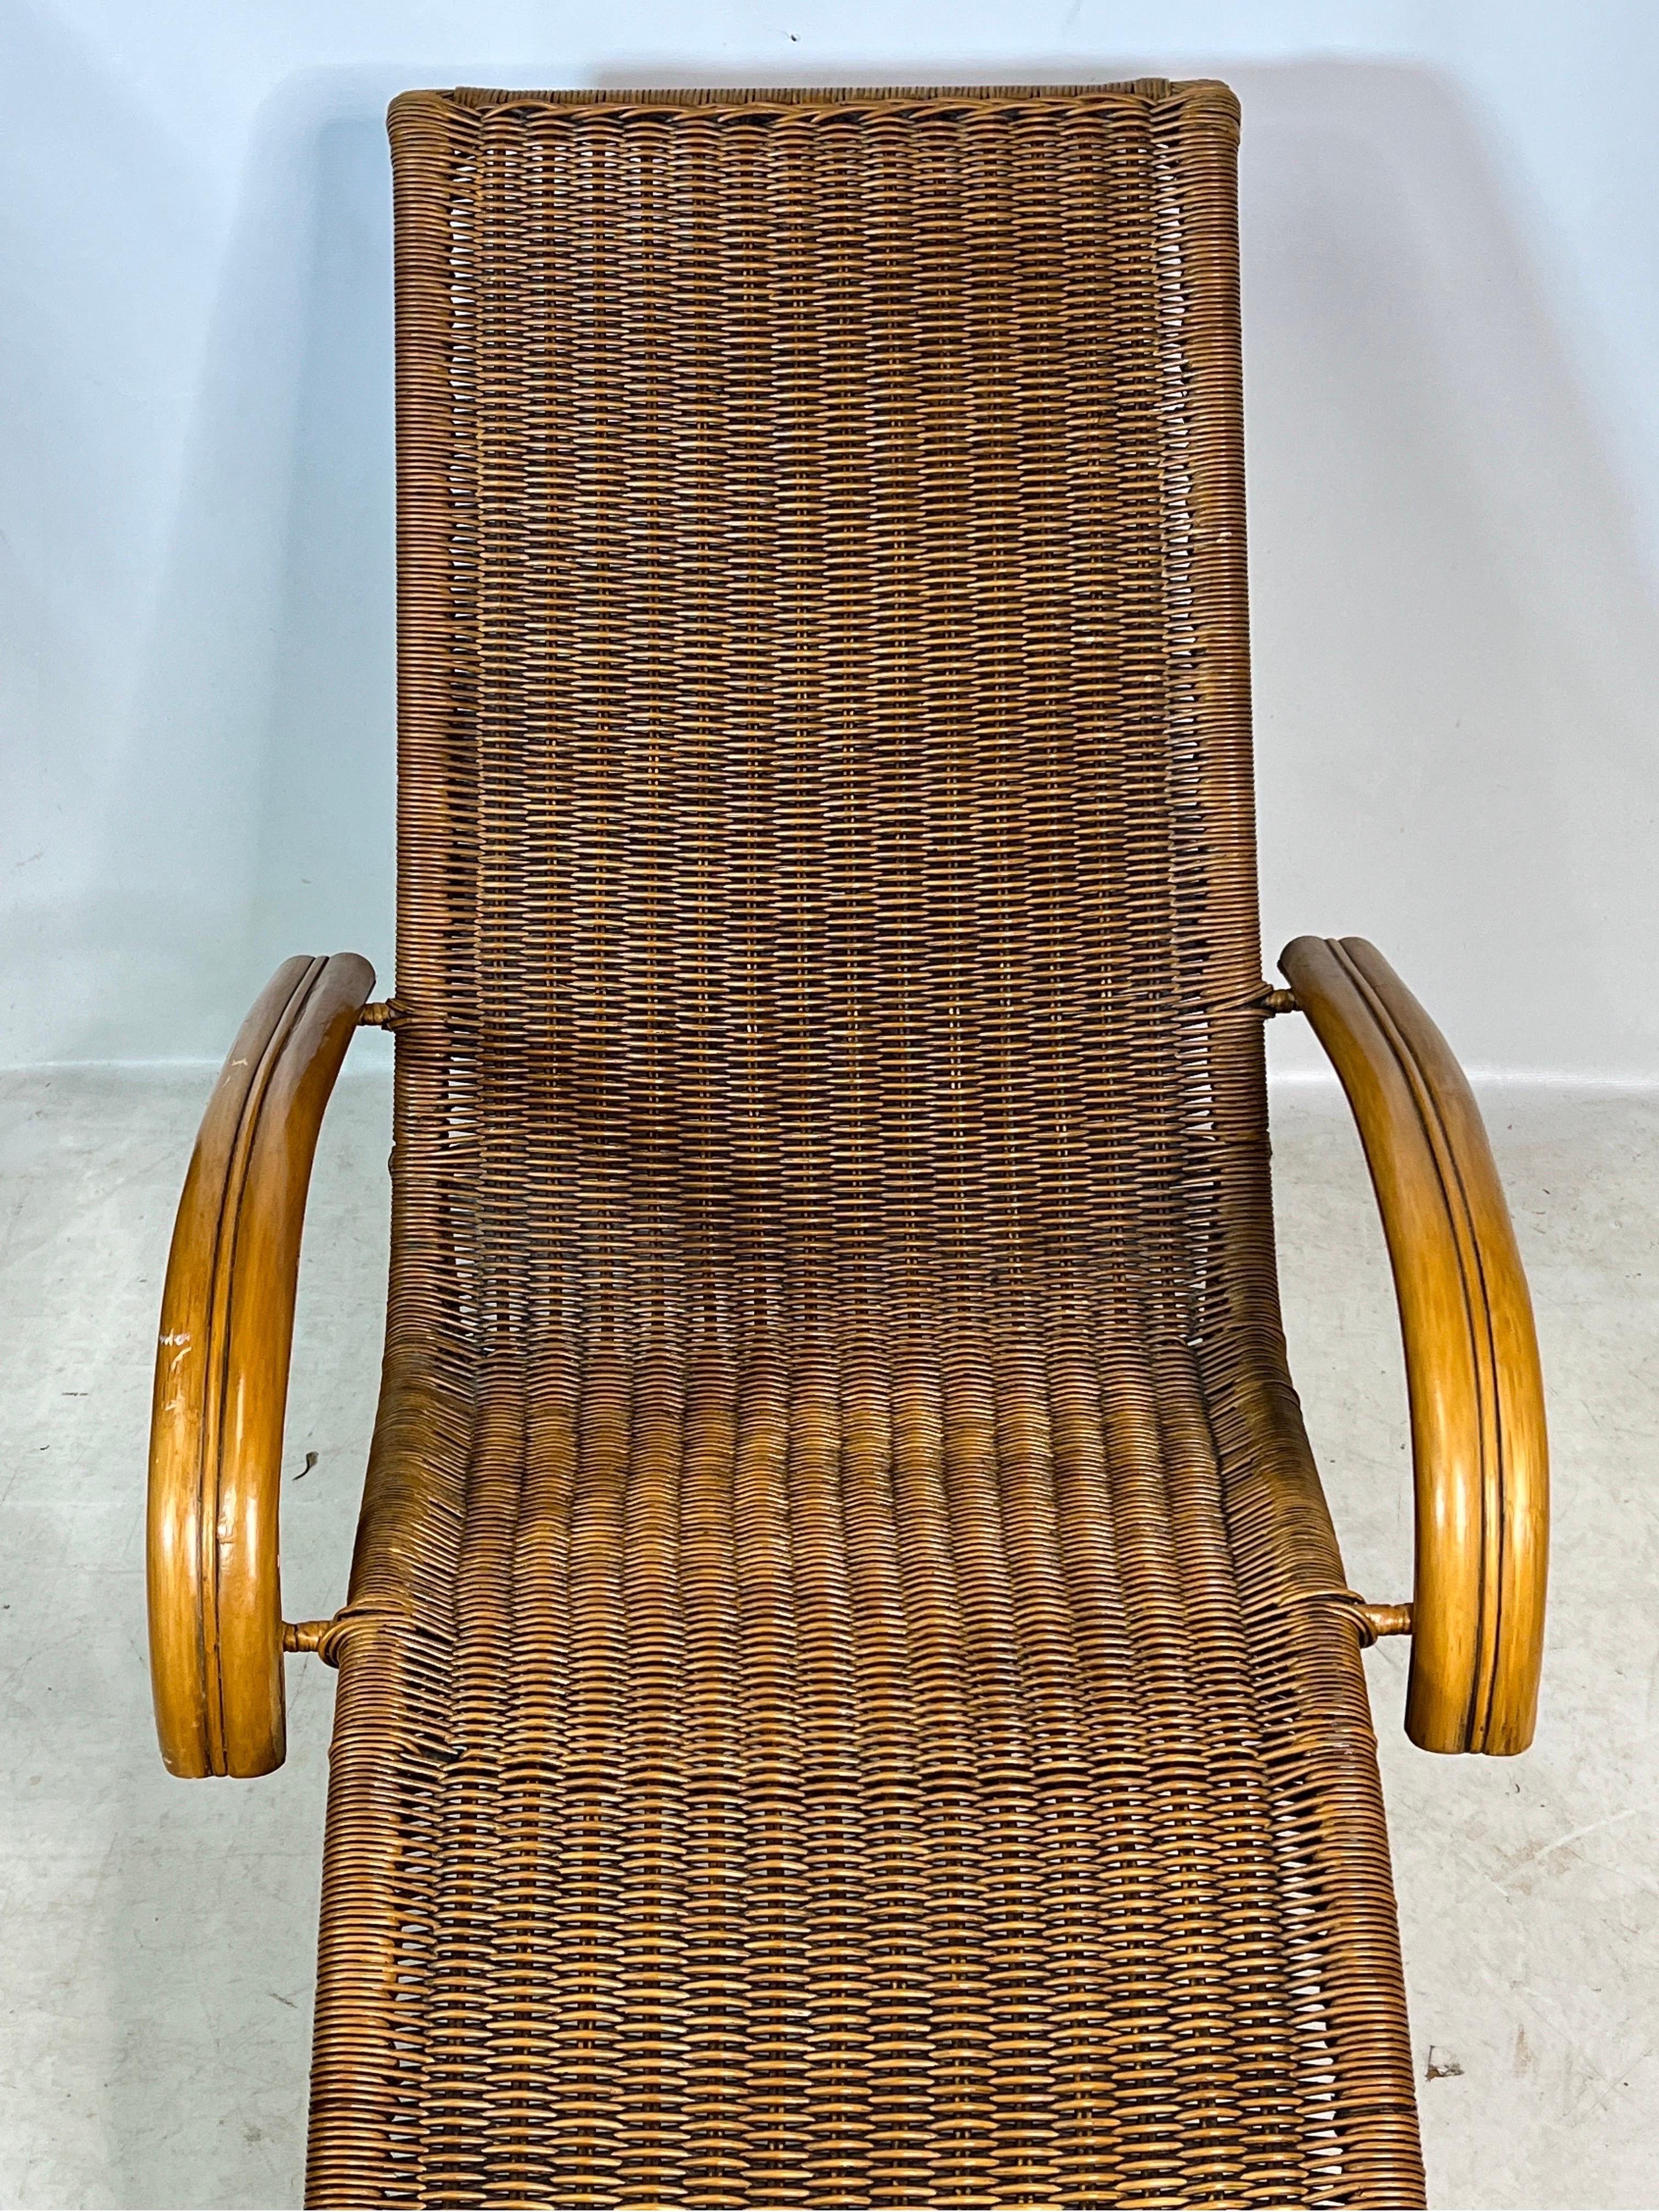 Vintage Pier 1 Imports Wicker and Rattan Lounge Chair In Good Condition In Esperance, NY